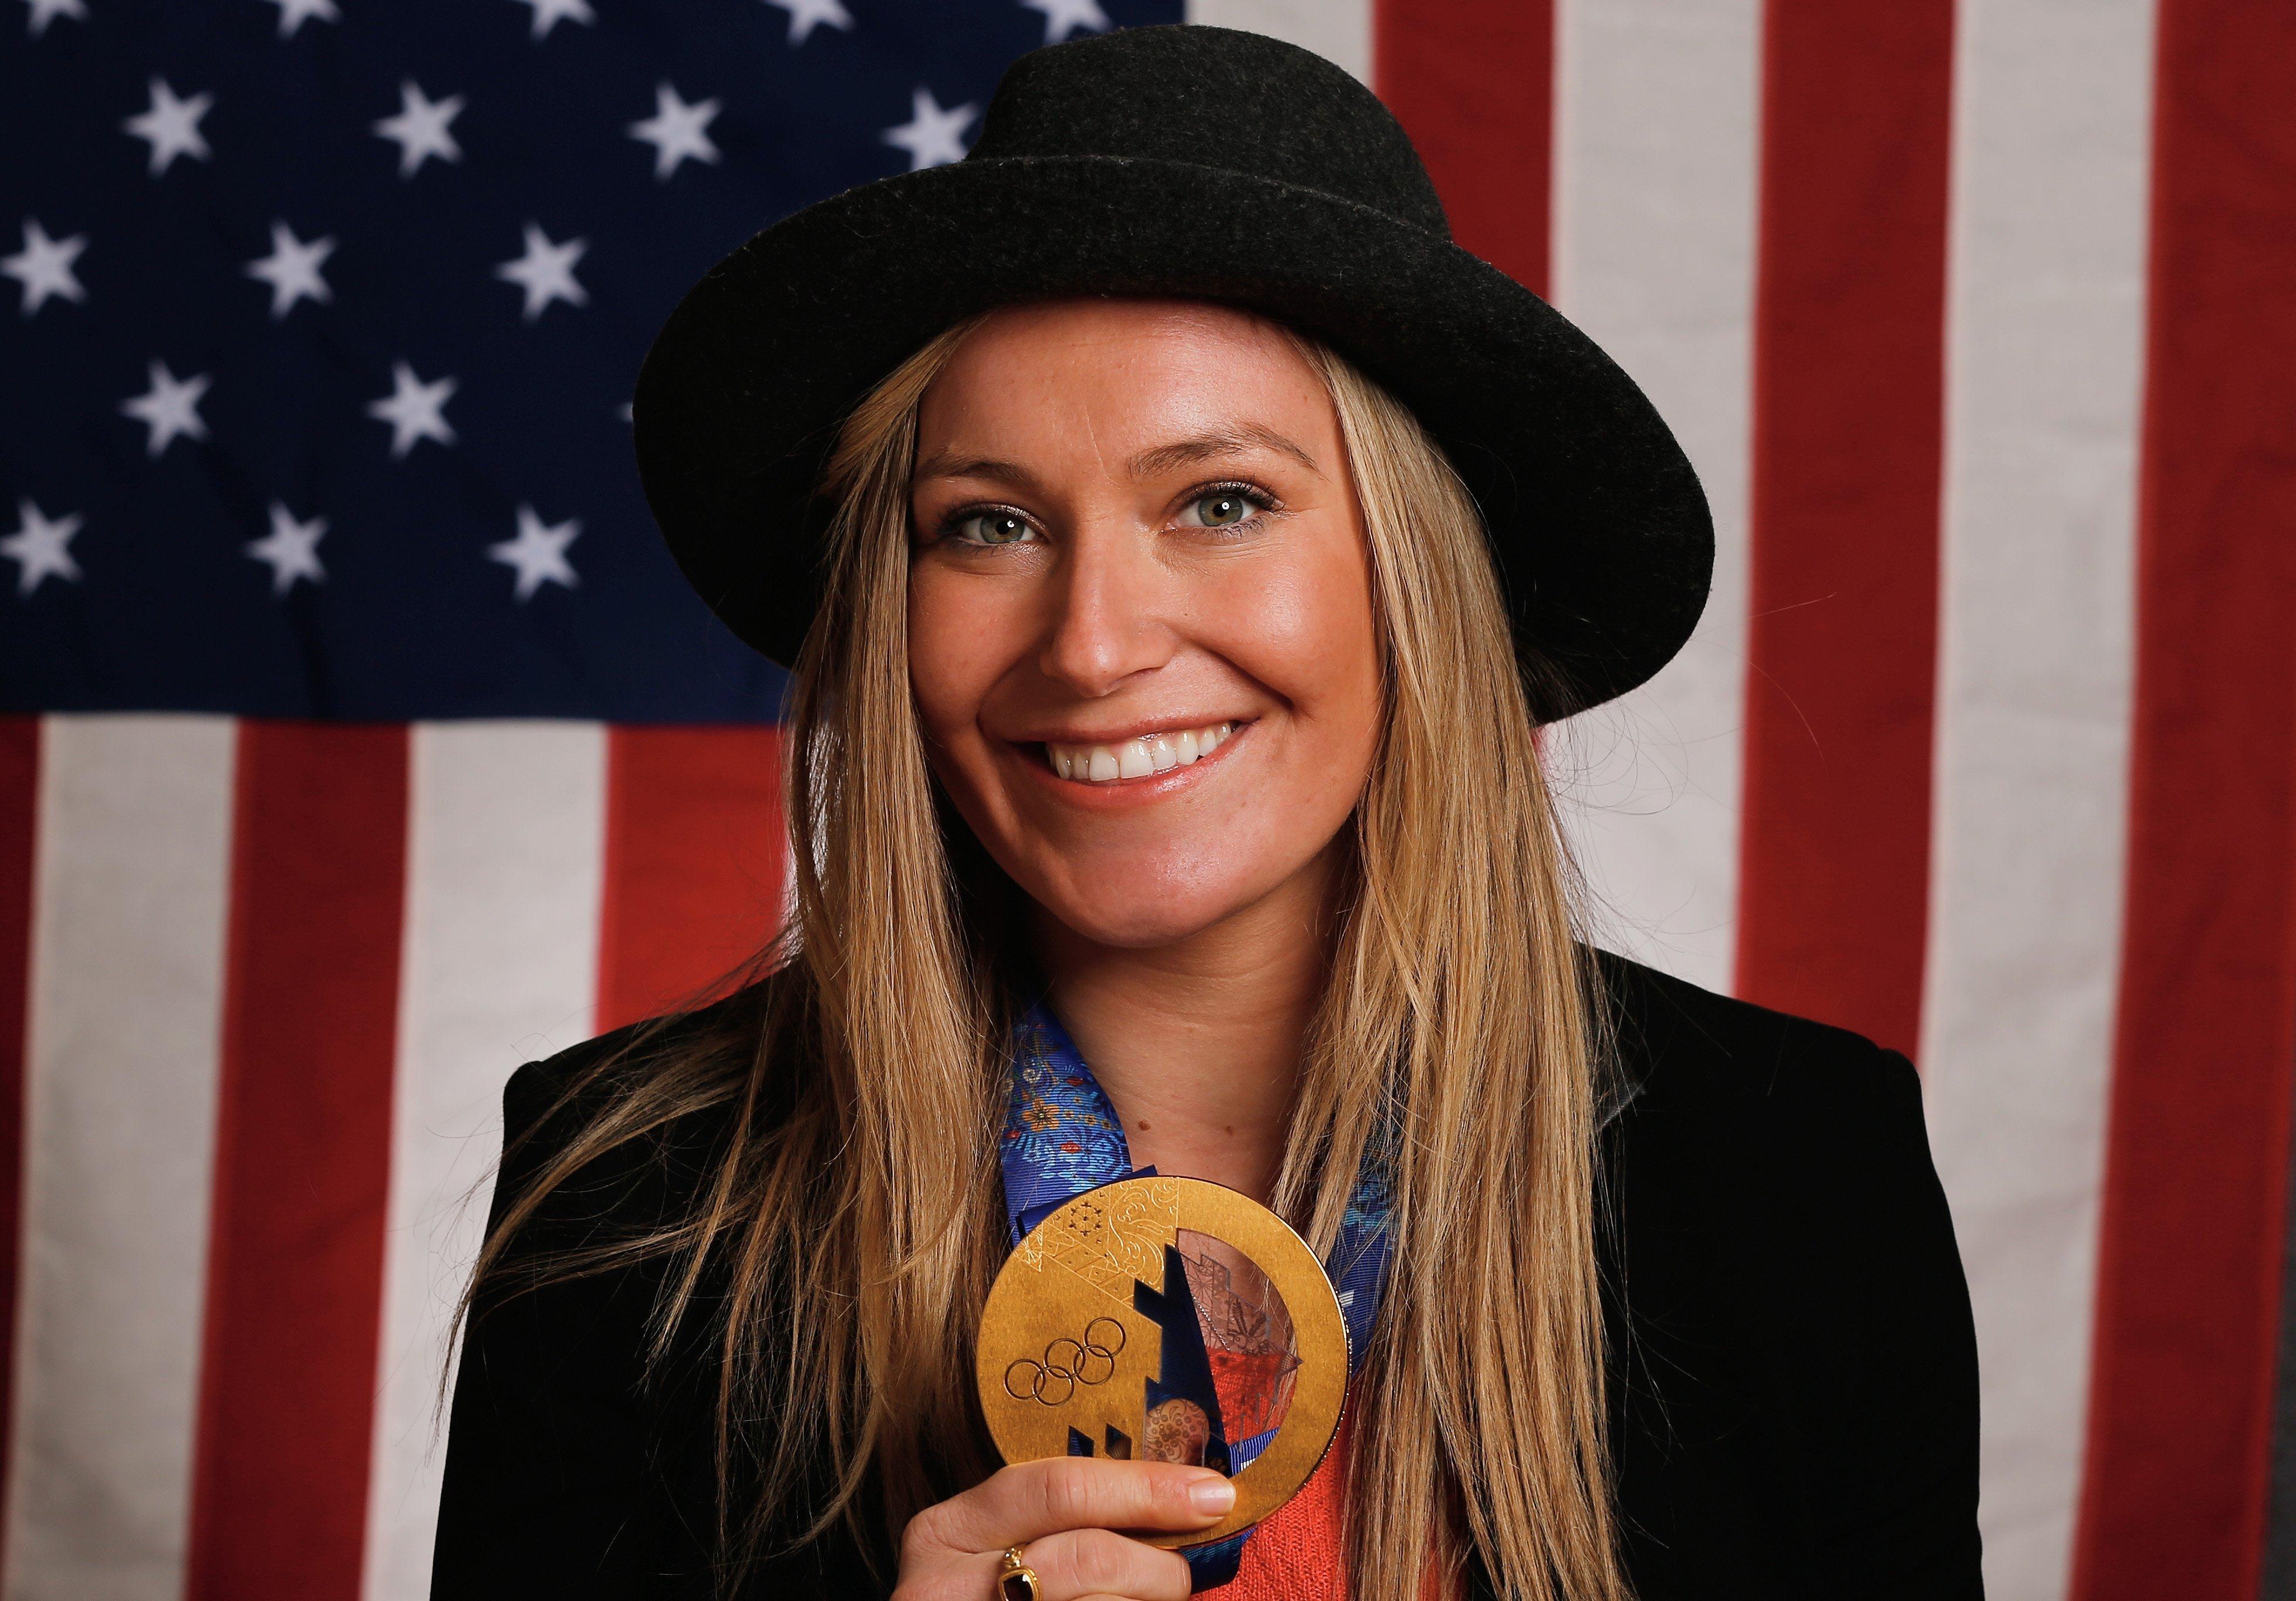 Snowboarder Jamie Anderson Of The United States Wallpaper